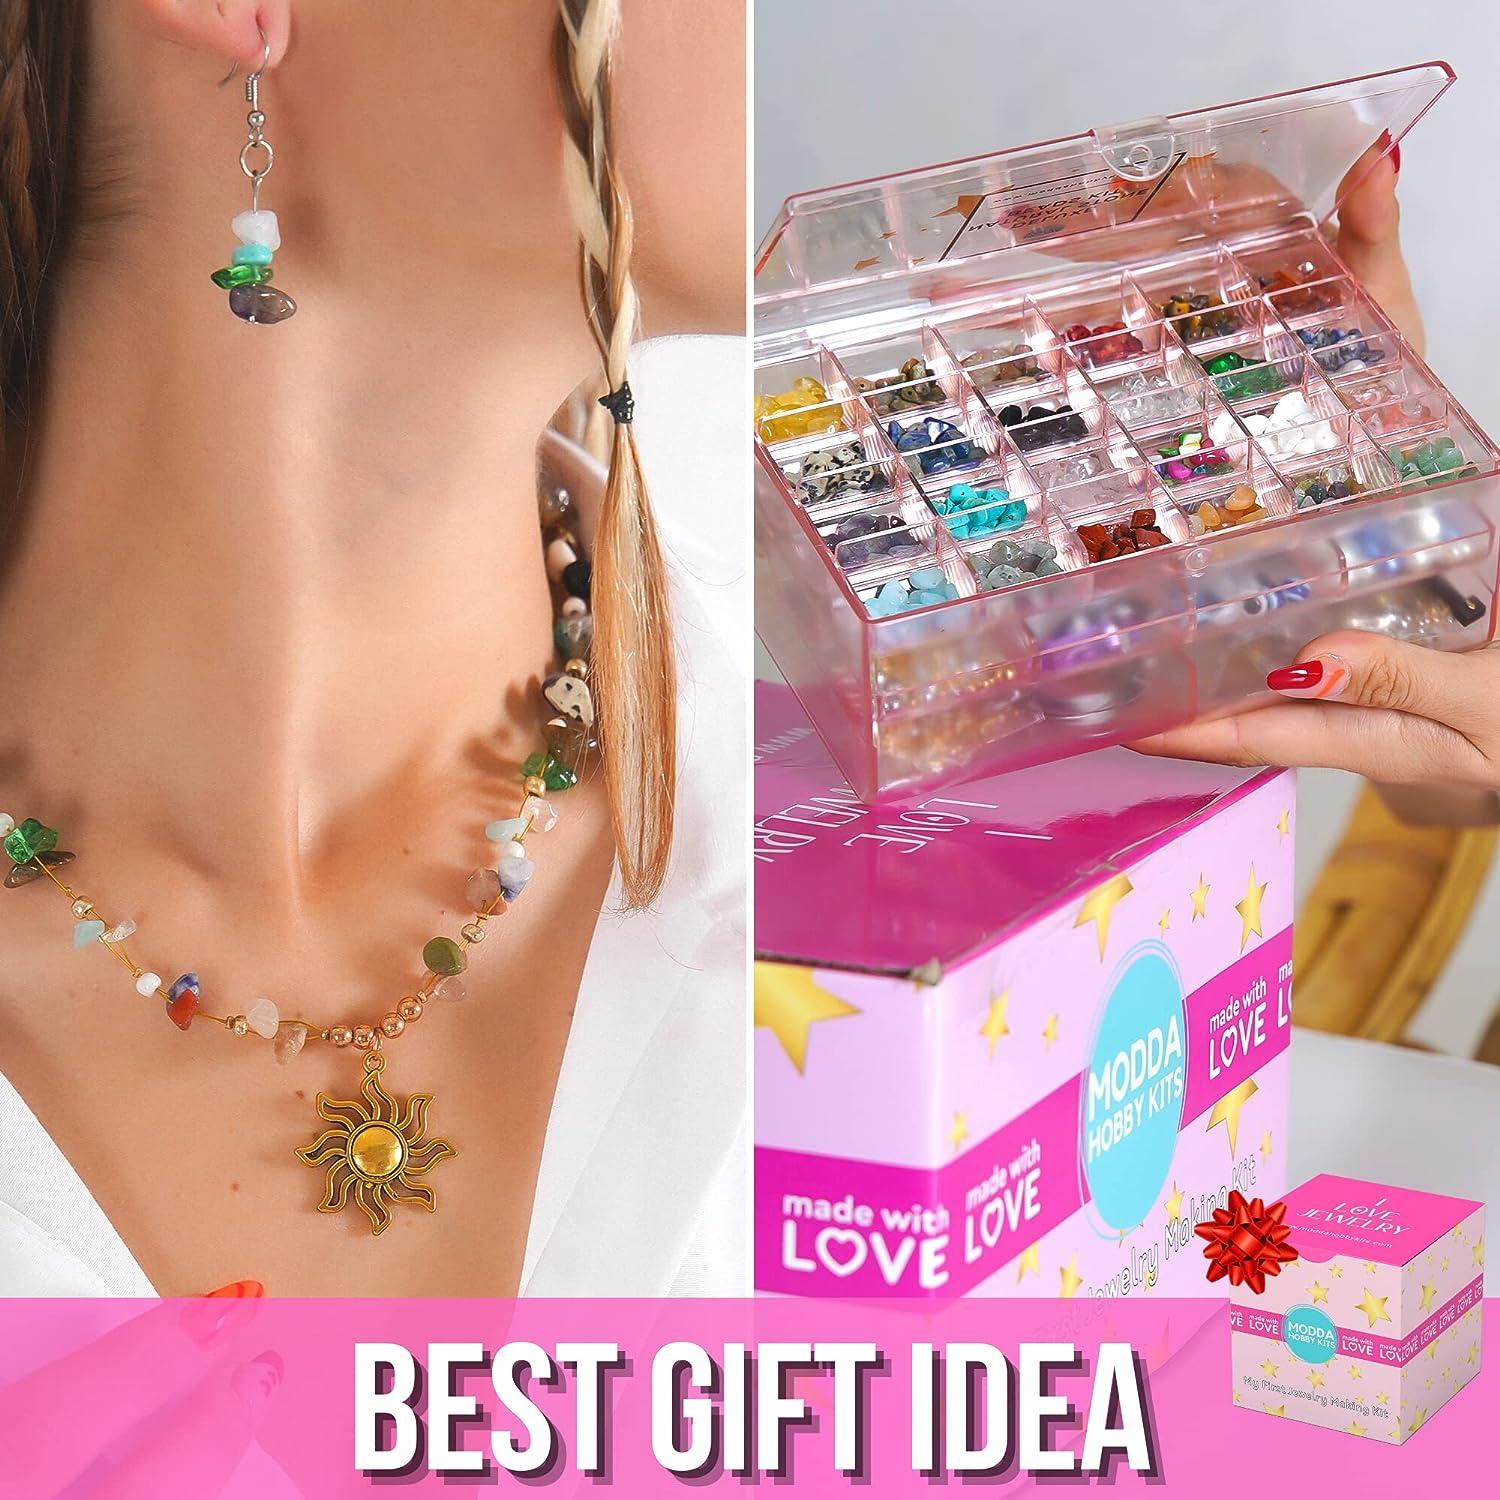 MODDA Natural Stone Jewelry Making Kit with Video Course, Includes